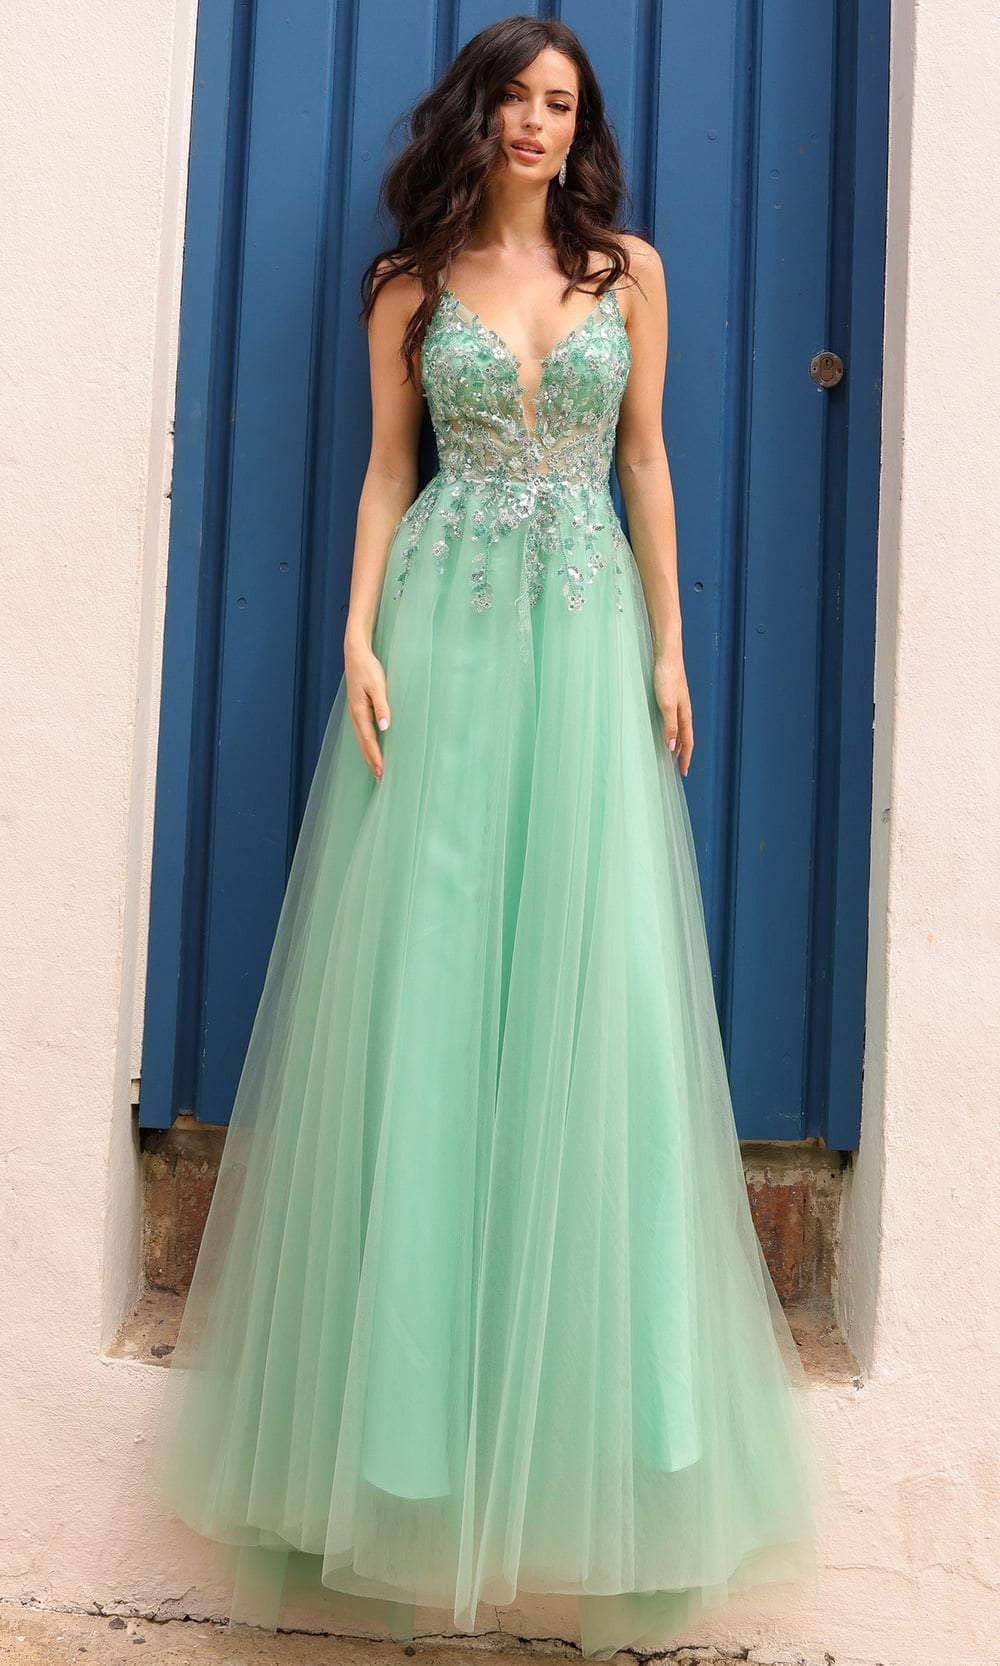 Image of Nox Anabel Q1391 - Illusion Embroidered A-Line Prom Dress